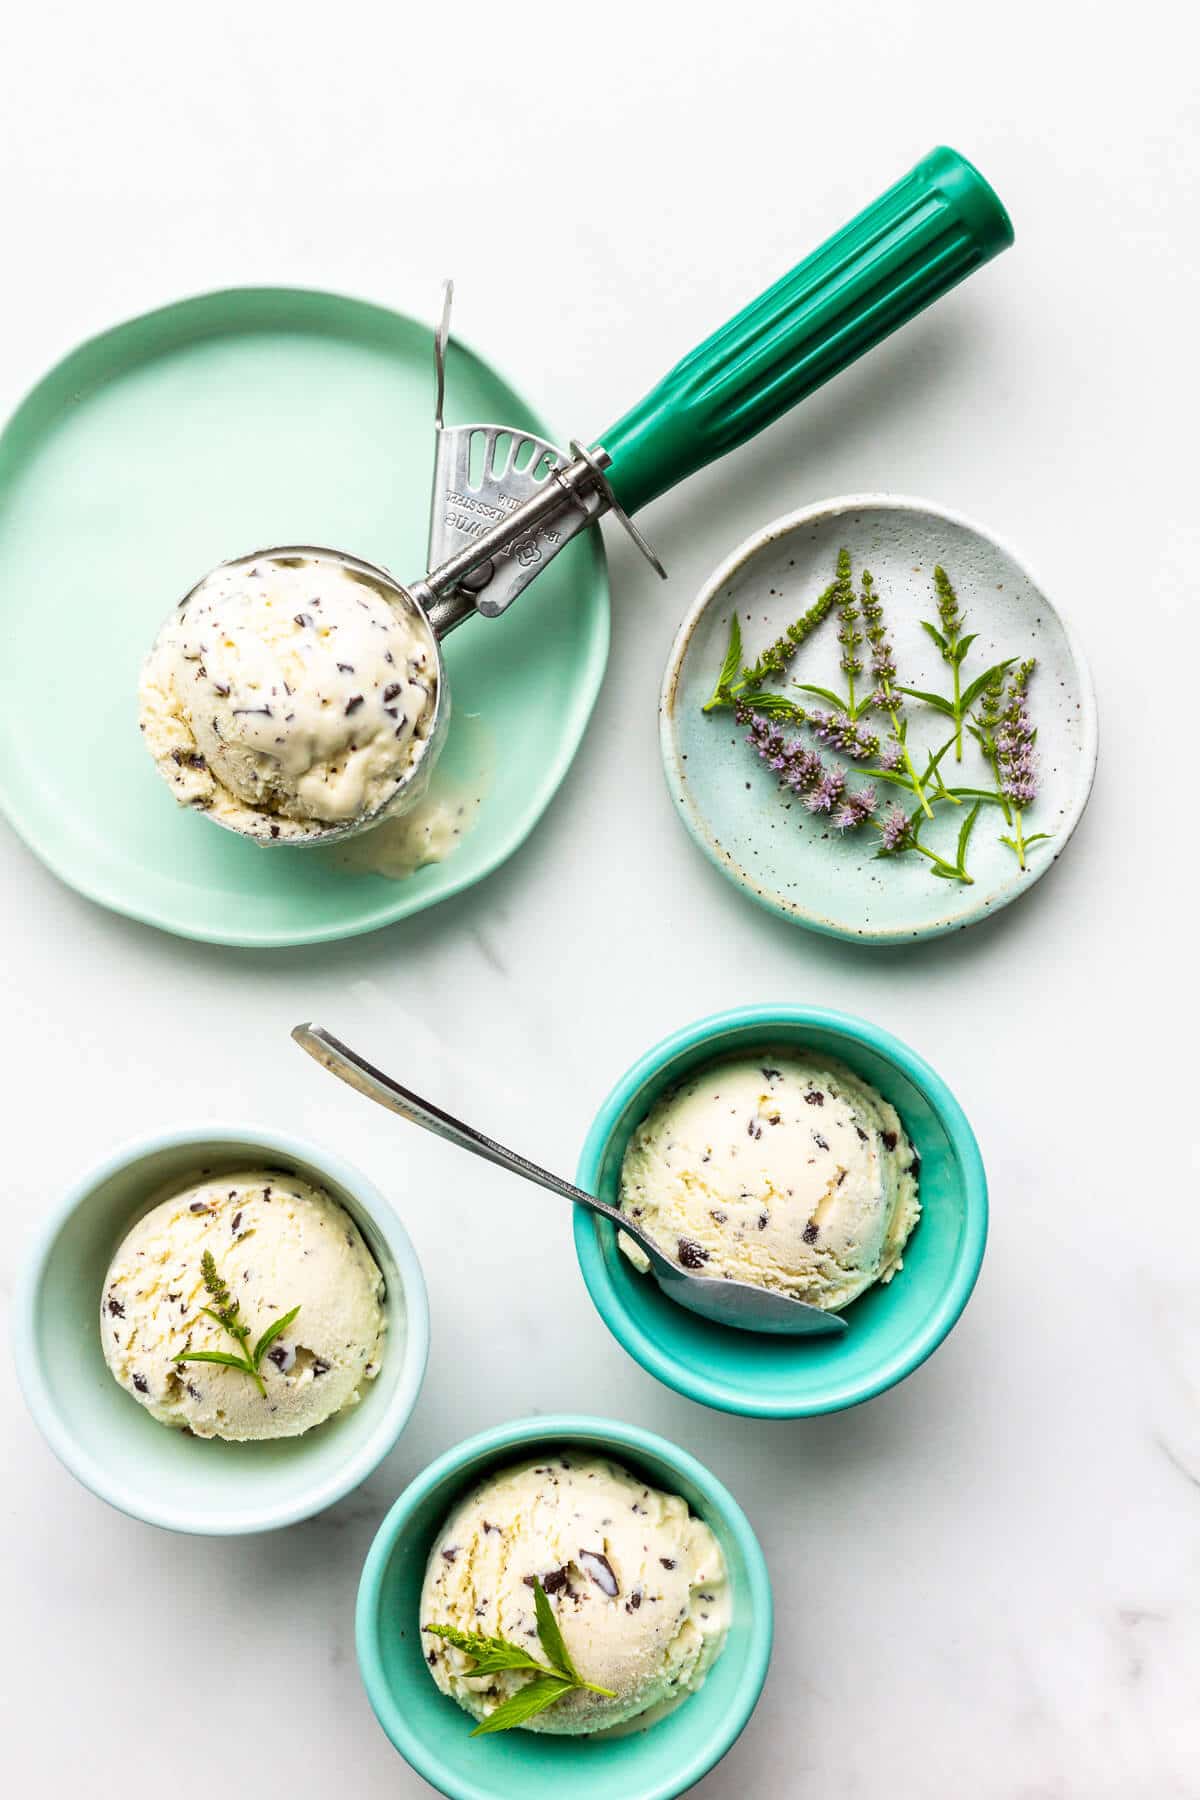 Green bowls with scoops of homemade mint chocolate chip ice cream.